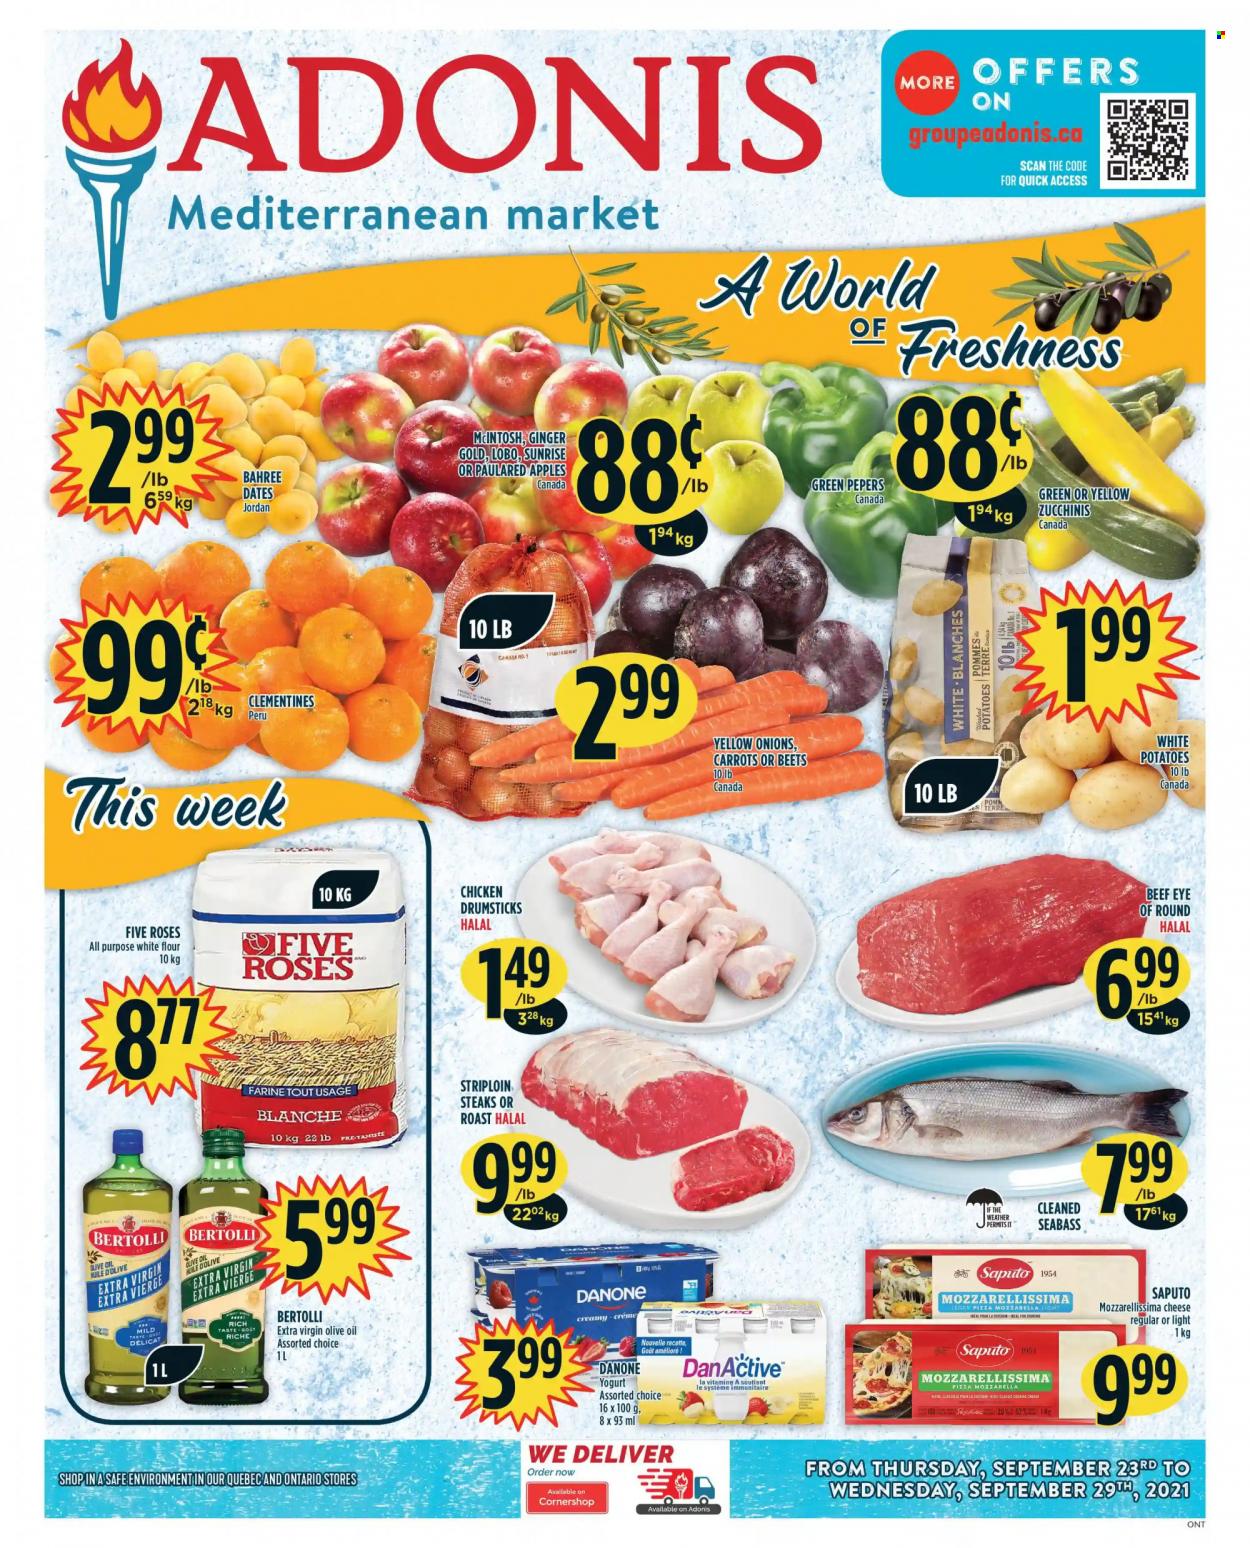 thumbnail - Adonis Flyer - September 23, 2021 - September 29, 2021 - Sales products - carrots, ginger, potatoes, apples, clementines, sea bass, pizza, Bertolli, yoghurt, flour, extra virgin olive oil, olive oil, oil, chicken drumsticks, chicken, beef meat, eye of round, striploin steak, Danone, steak. Page 1.